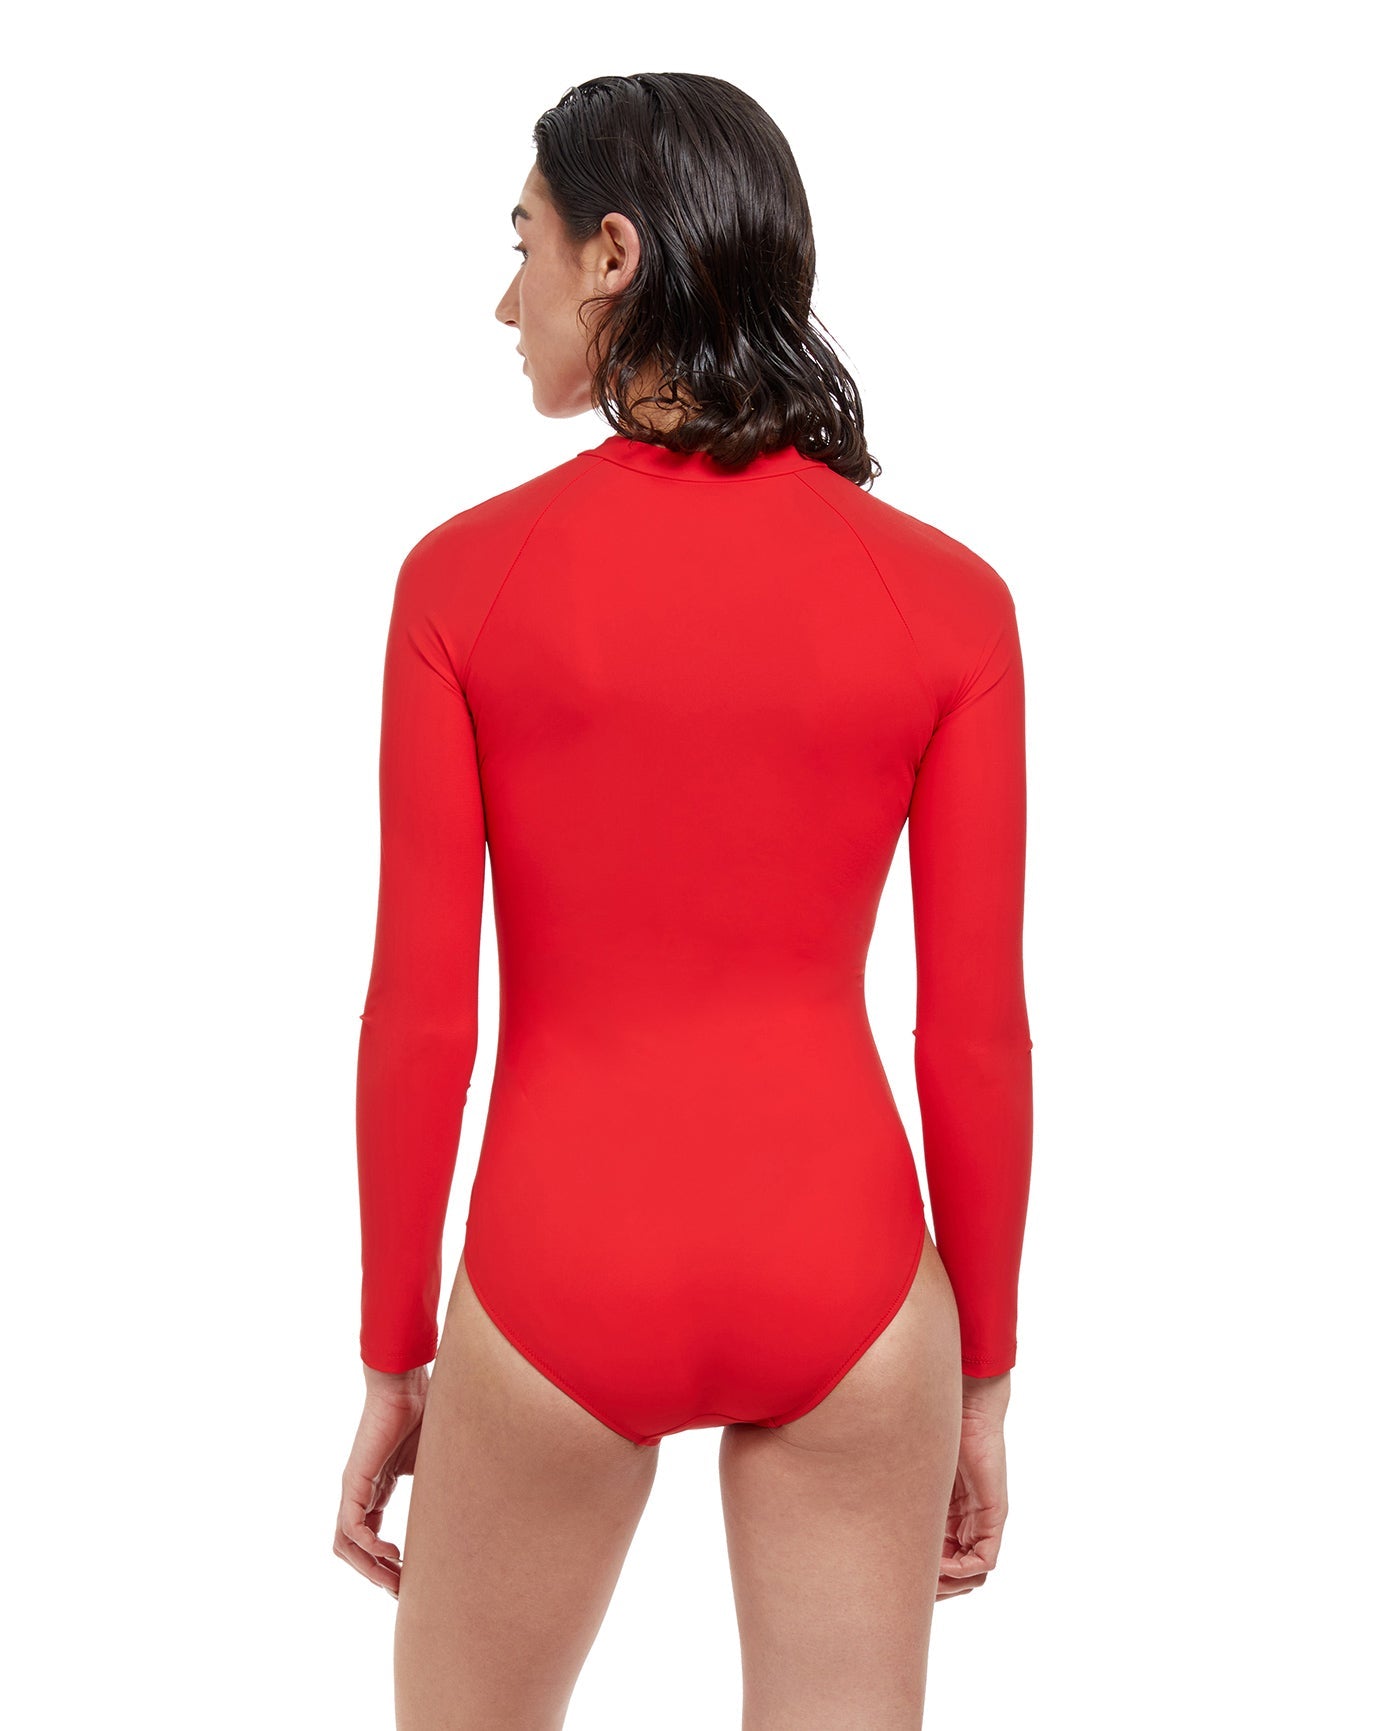 Back View Of Free Sport Ultimate Wave Long Sleeve High Neck Rash Guard One Piece Swimsuit | FREE SPORT ULTIMATE WAVE RED